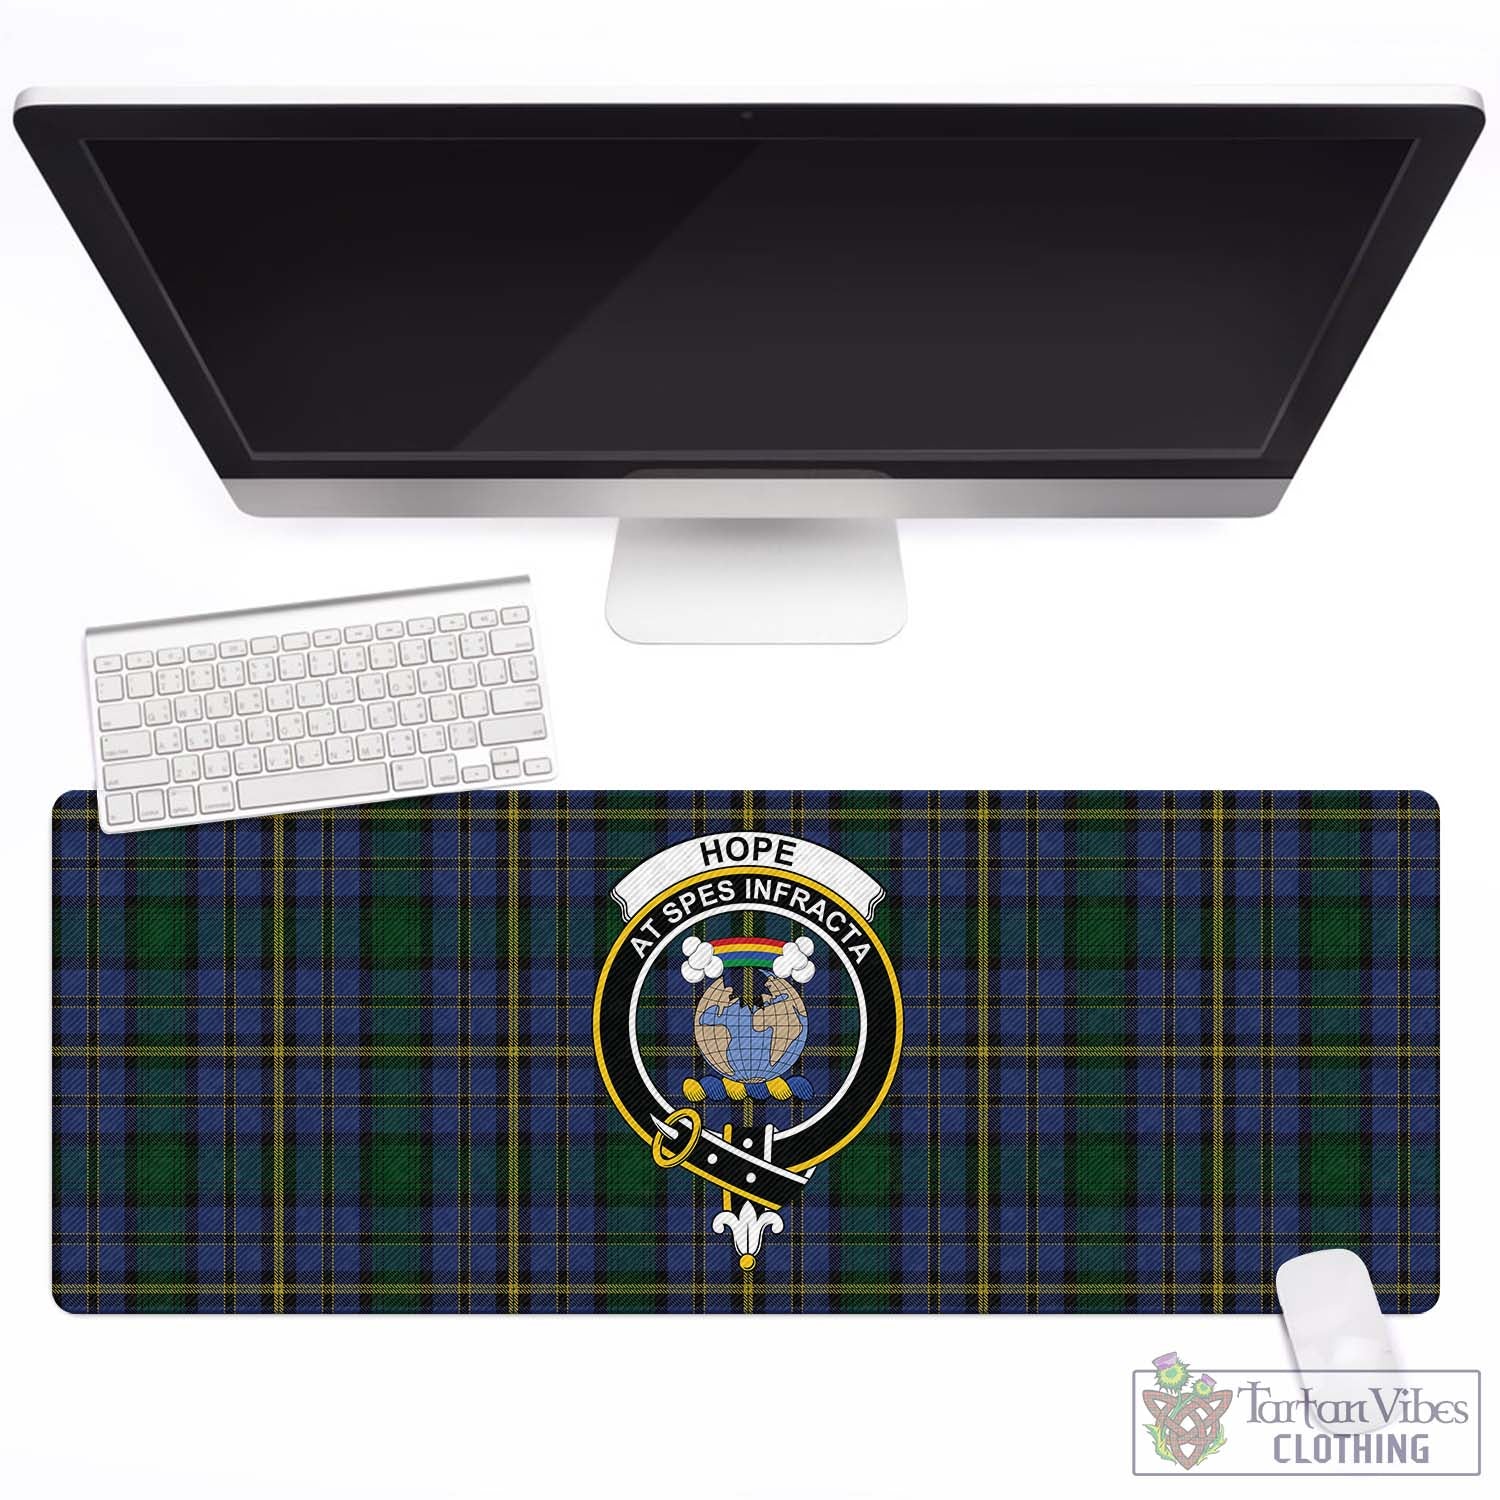 Tartan Vibes Clothing Hope Clan Originaux Tartan Mouse Pad with Family Crest